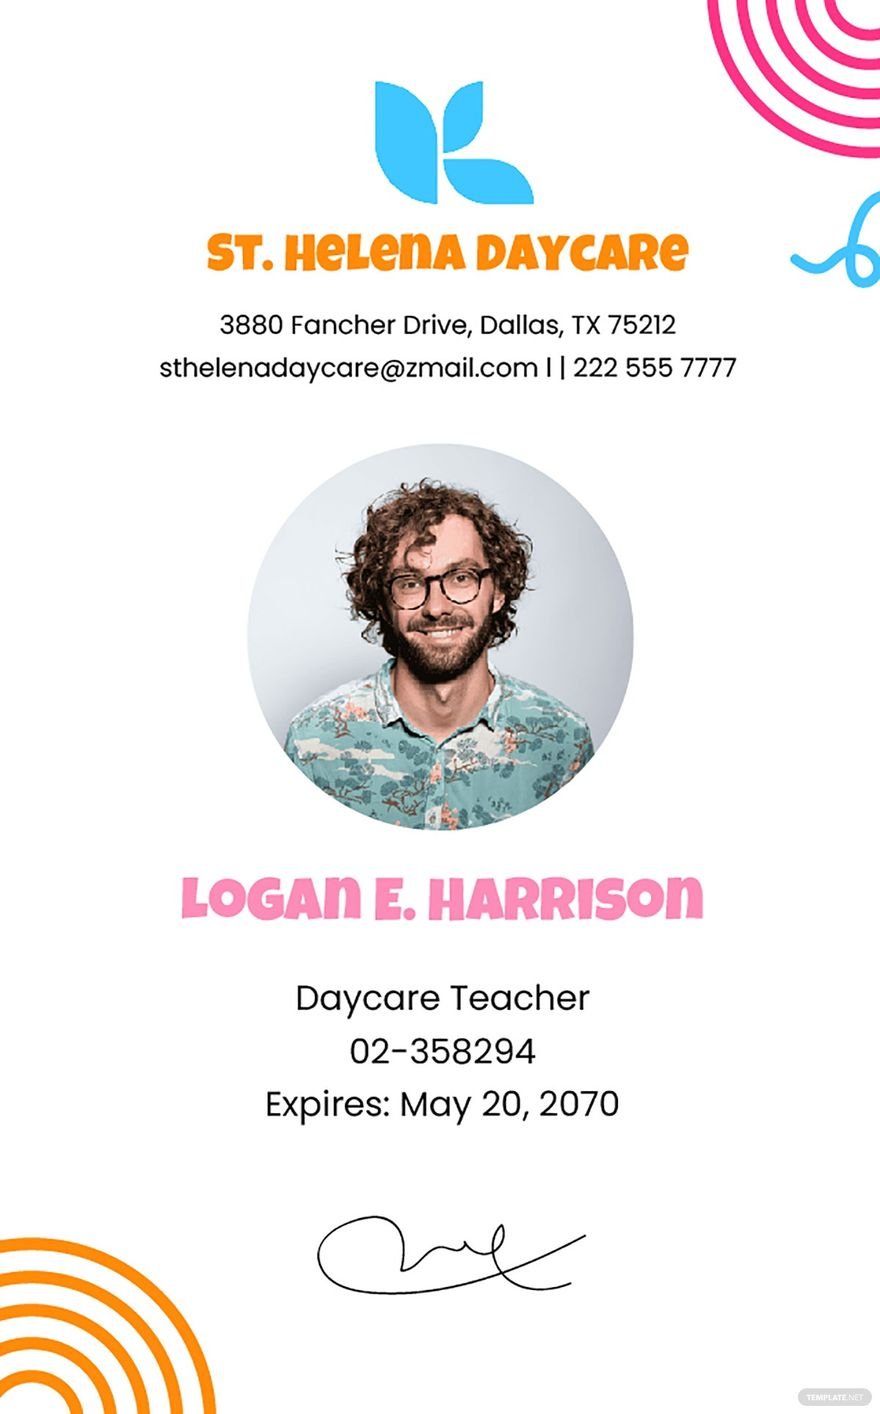 Daycare Teacher ID Card Template in Word, Illustrator, PSD, Apple Pages, Publisher